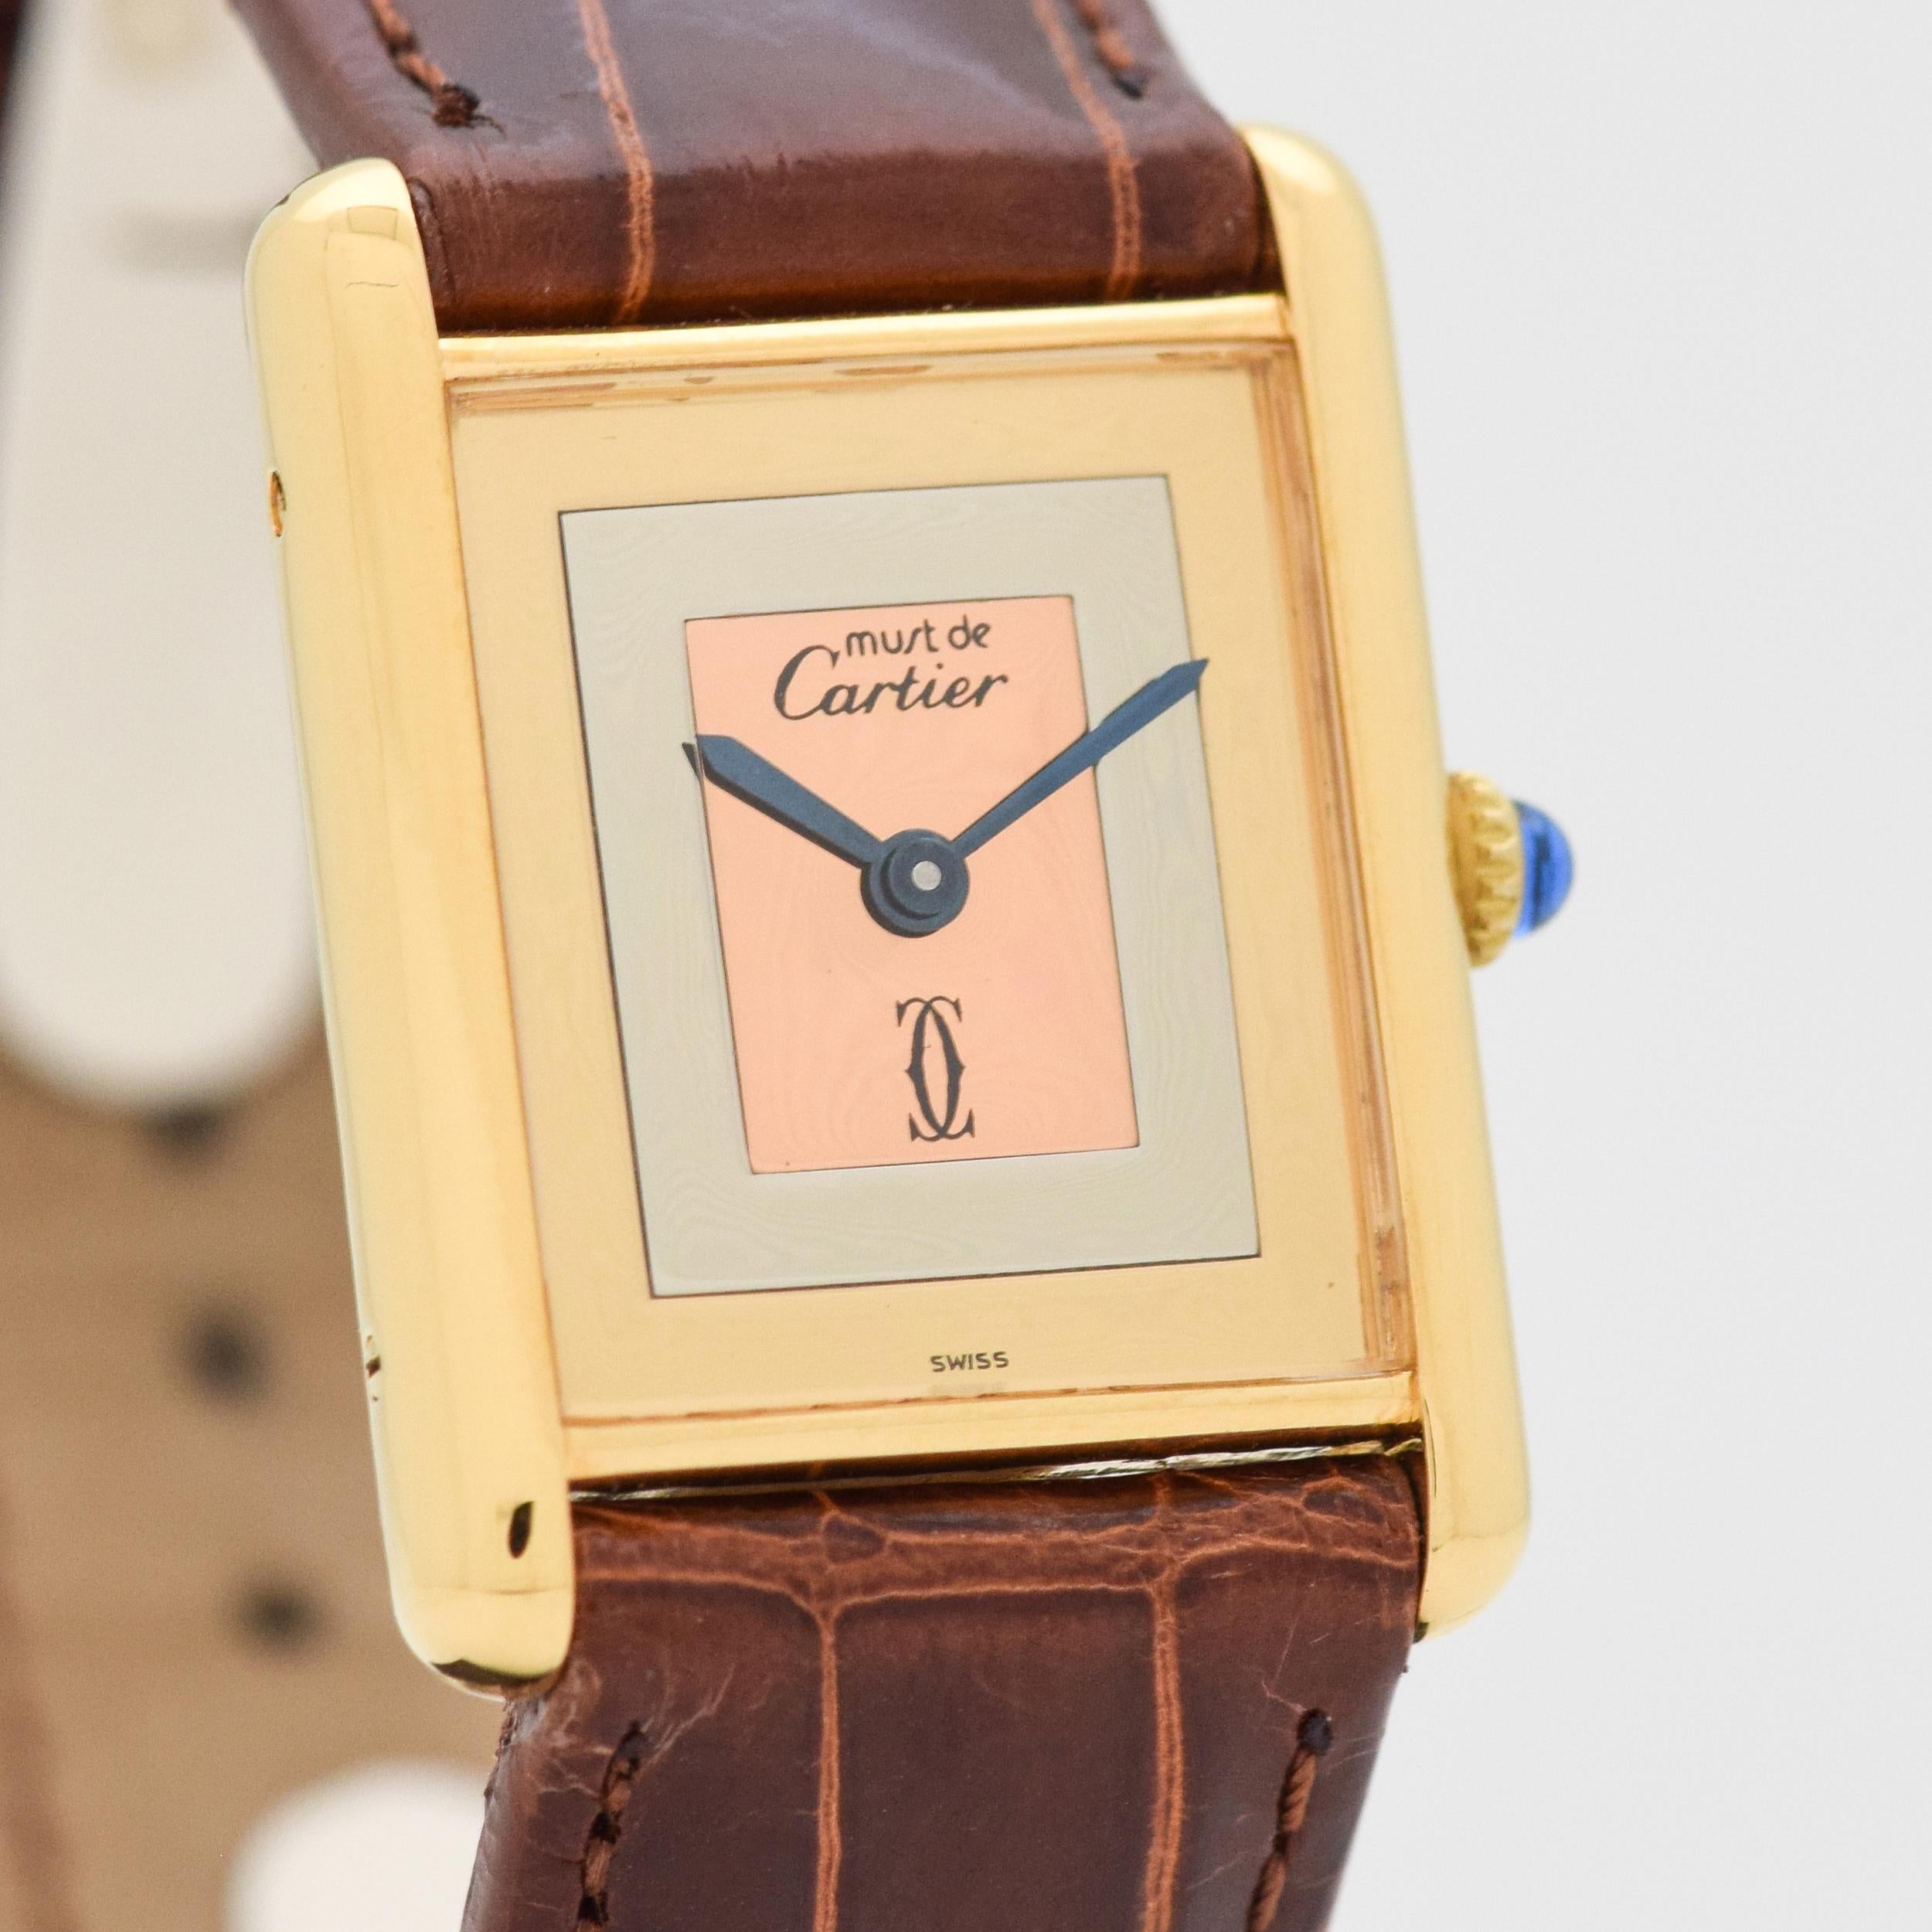 1980's era Cartier Tank Must de Men's Sized Watch. 18K Yellow Gold Plated over Sterling Silver case. Case size, 23mm wide. Tri-color dial. Powered by a 17-jewel, manual caliber movement. Equipped with original, Cartier papers. Swiss-made.